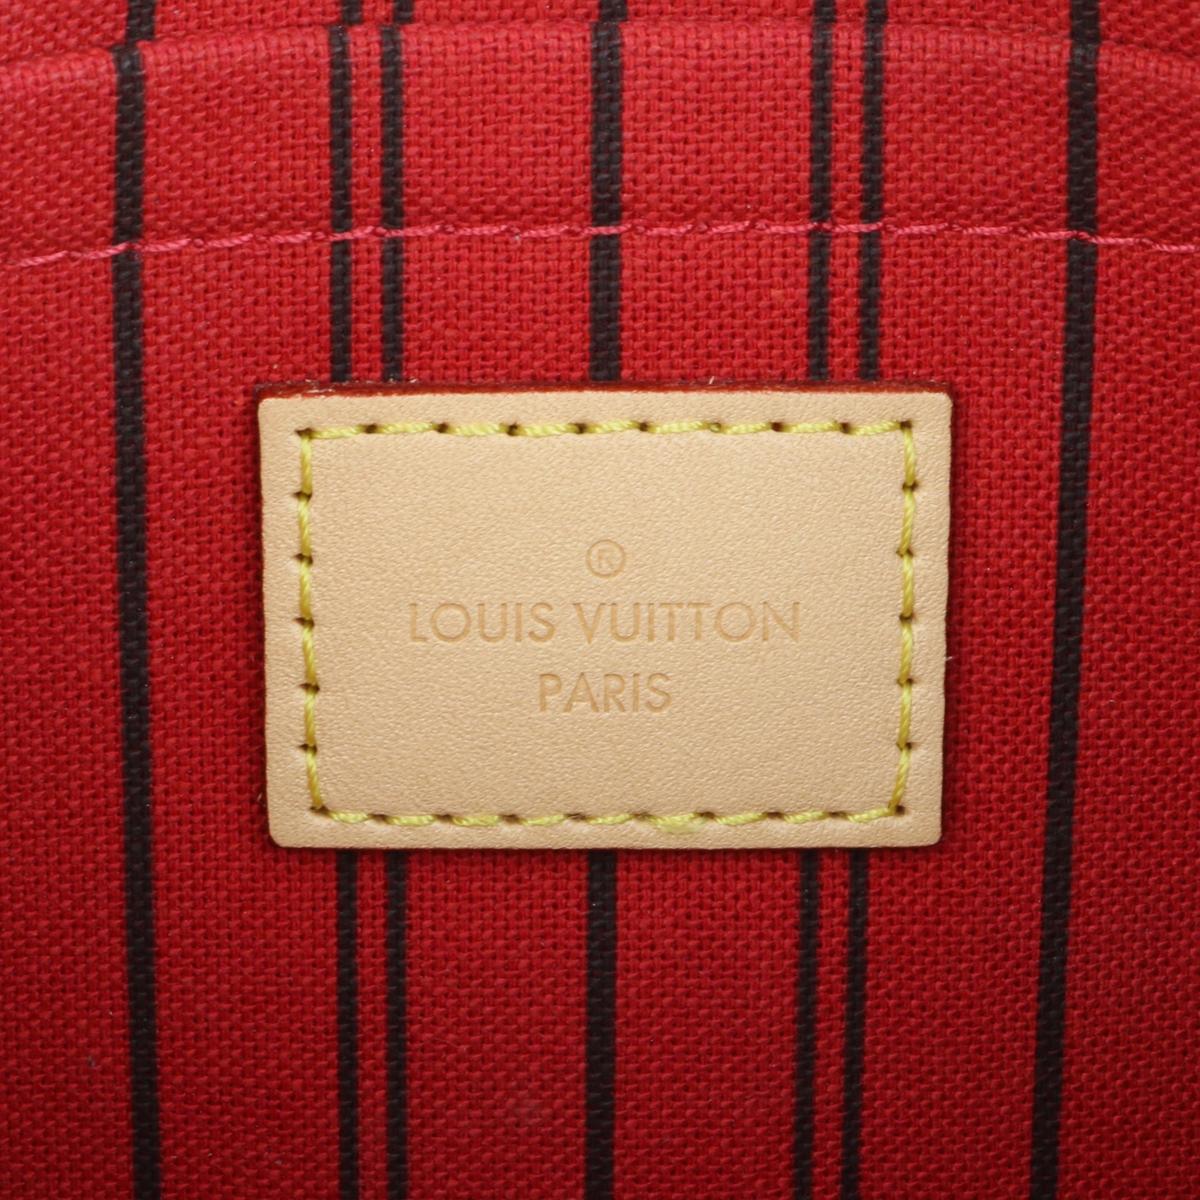 Louis Vuitton Neverfull MM Pochette Pouch in Monogram with Red Interior 2019 10